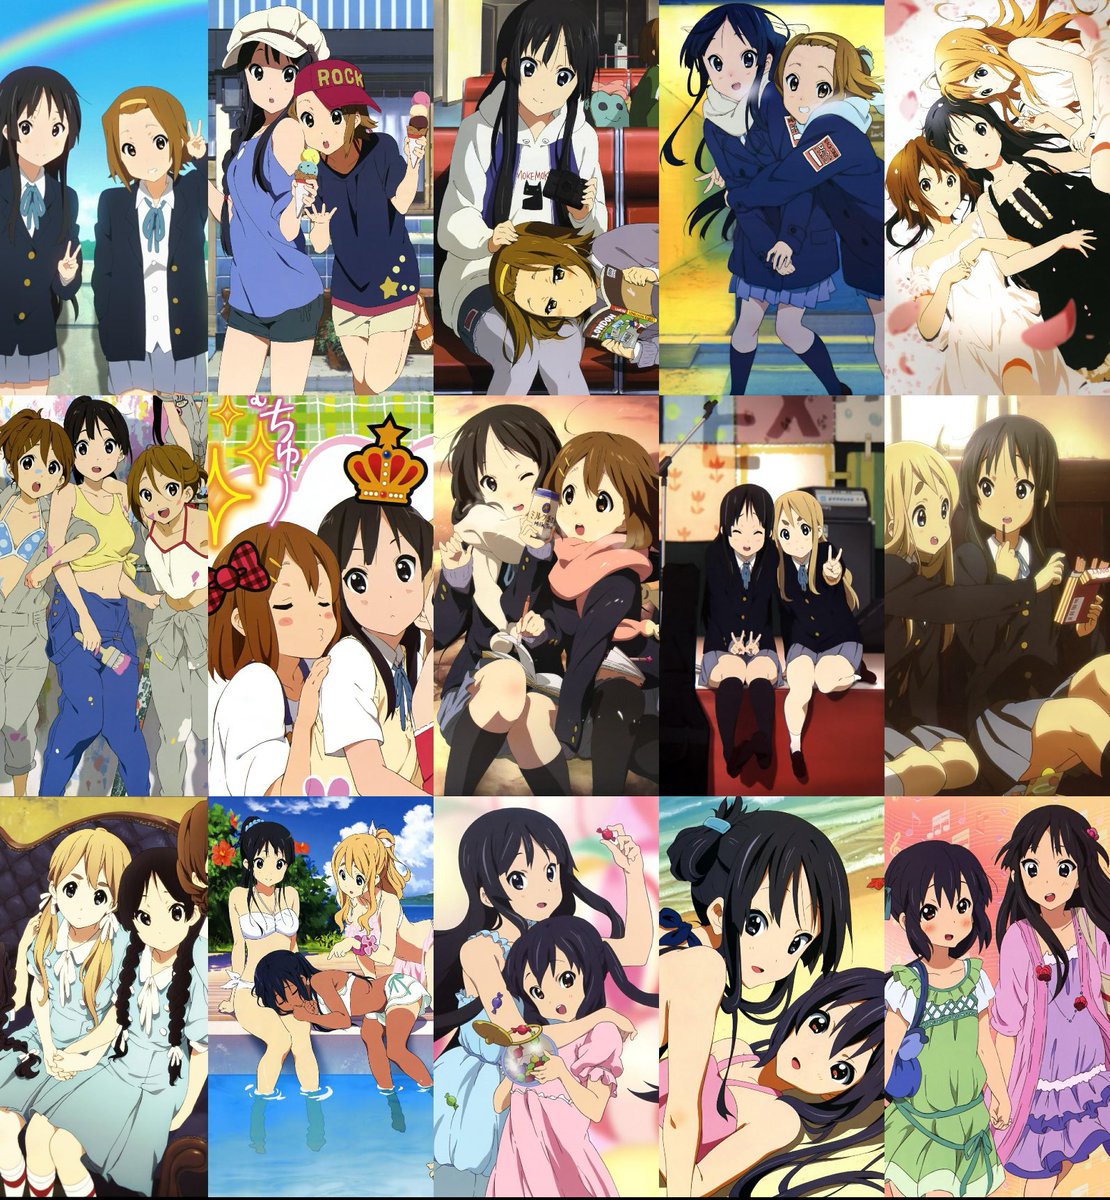 Someone on Reddit made a collage of most official k-on yuri art. I wish i could credit them but the account seems to be suspended.